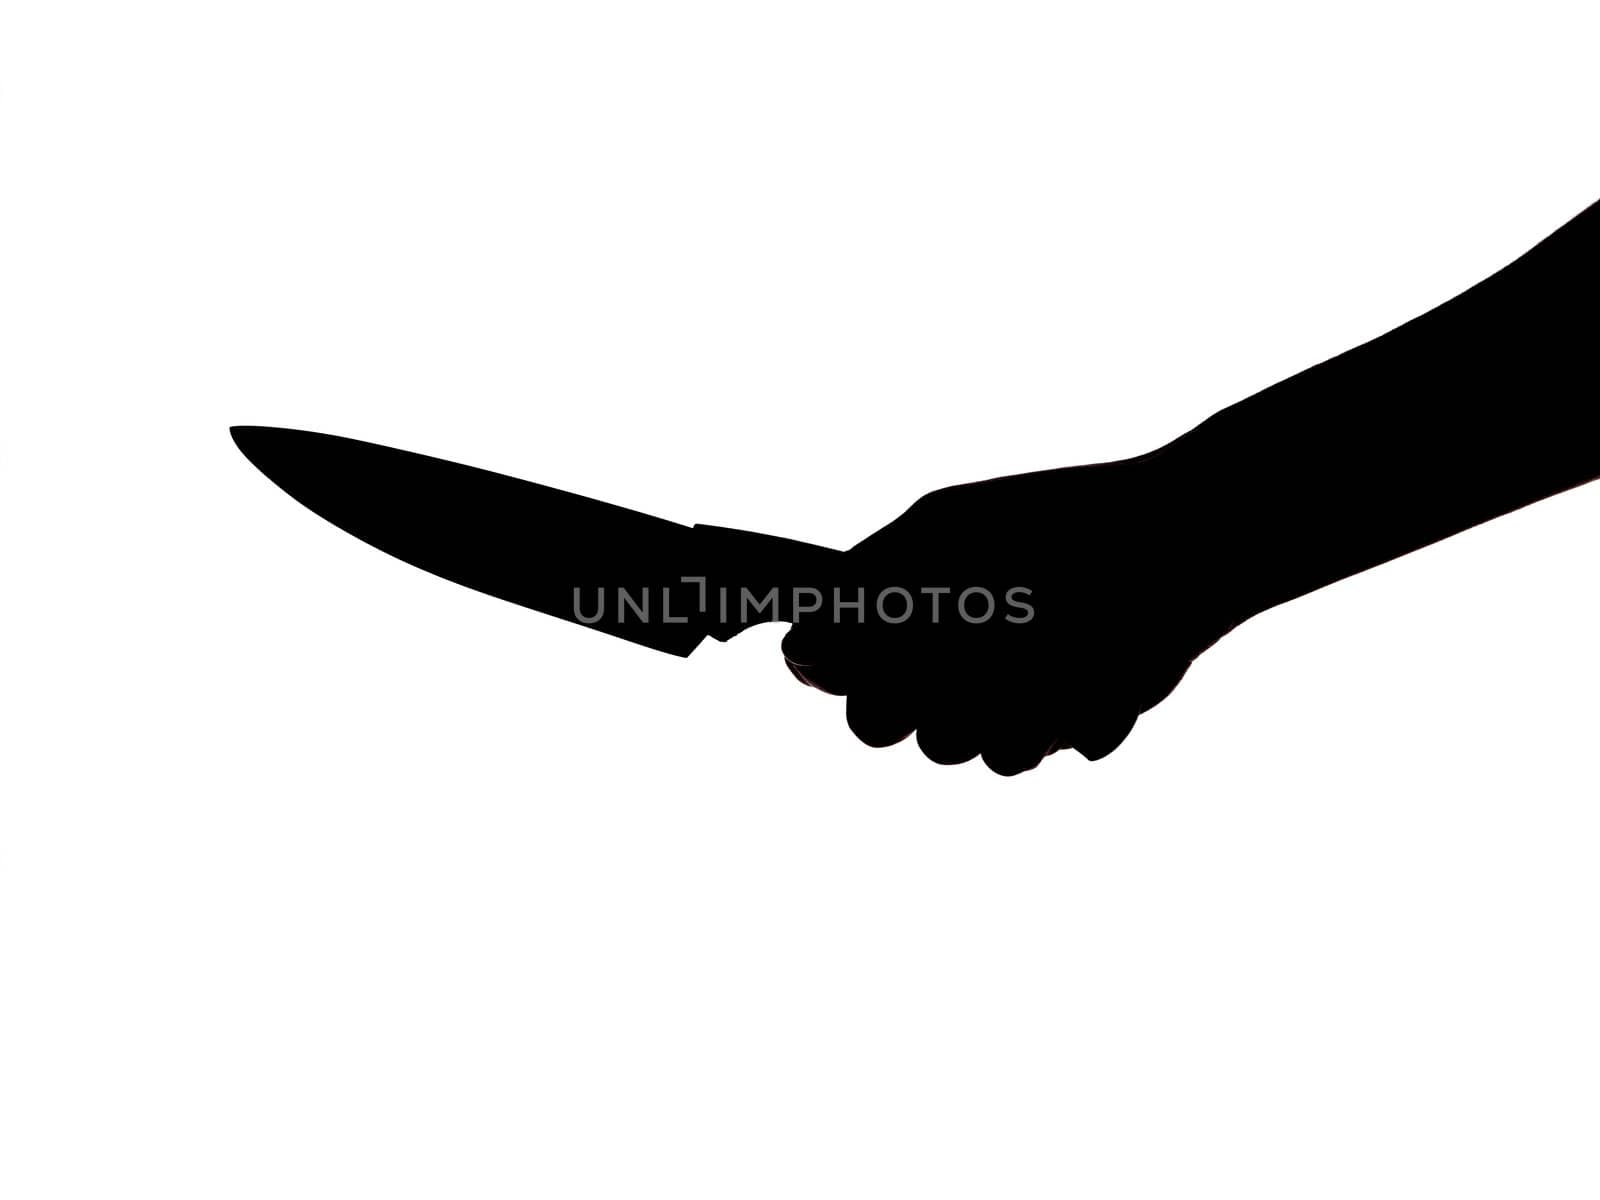 Silhouette of an hand holding a kitchen knife by gemenacom